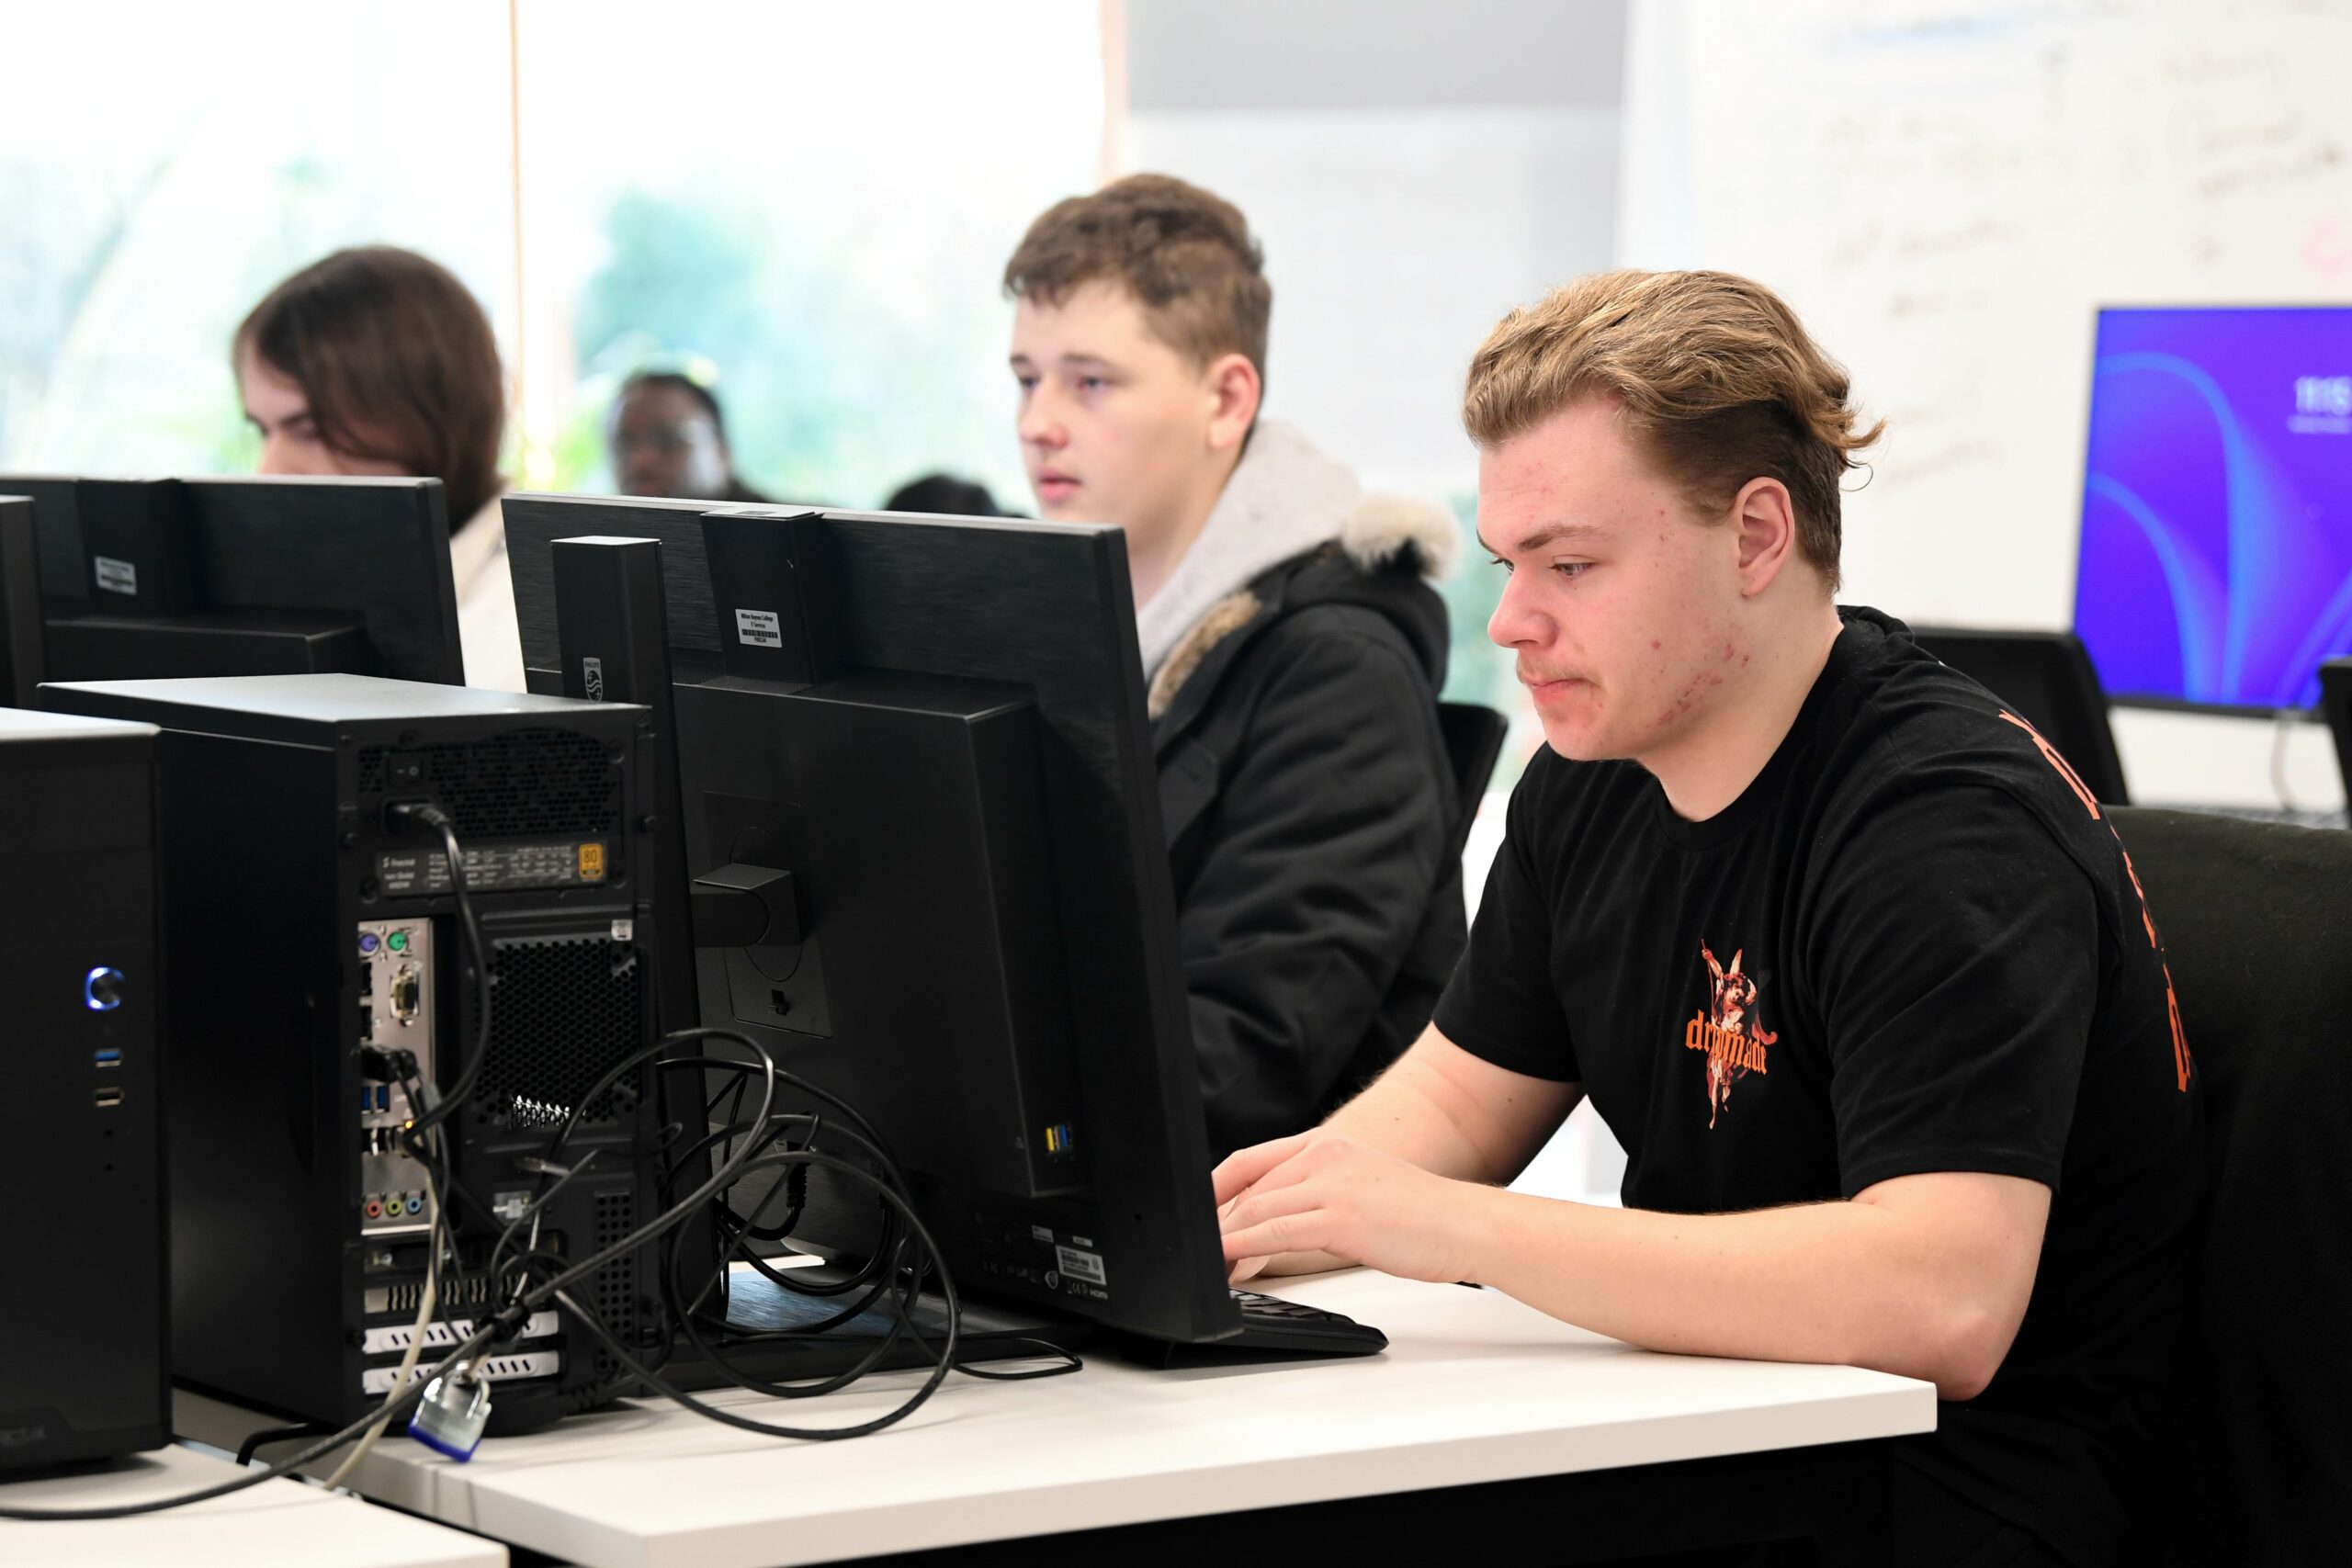 Students working in a computer room on desktops